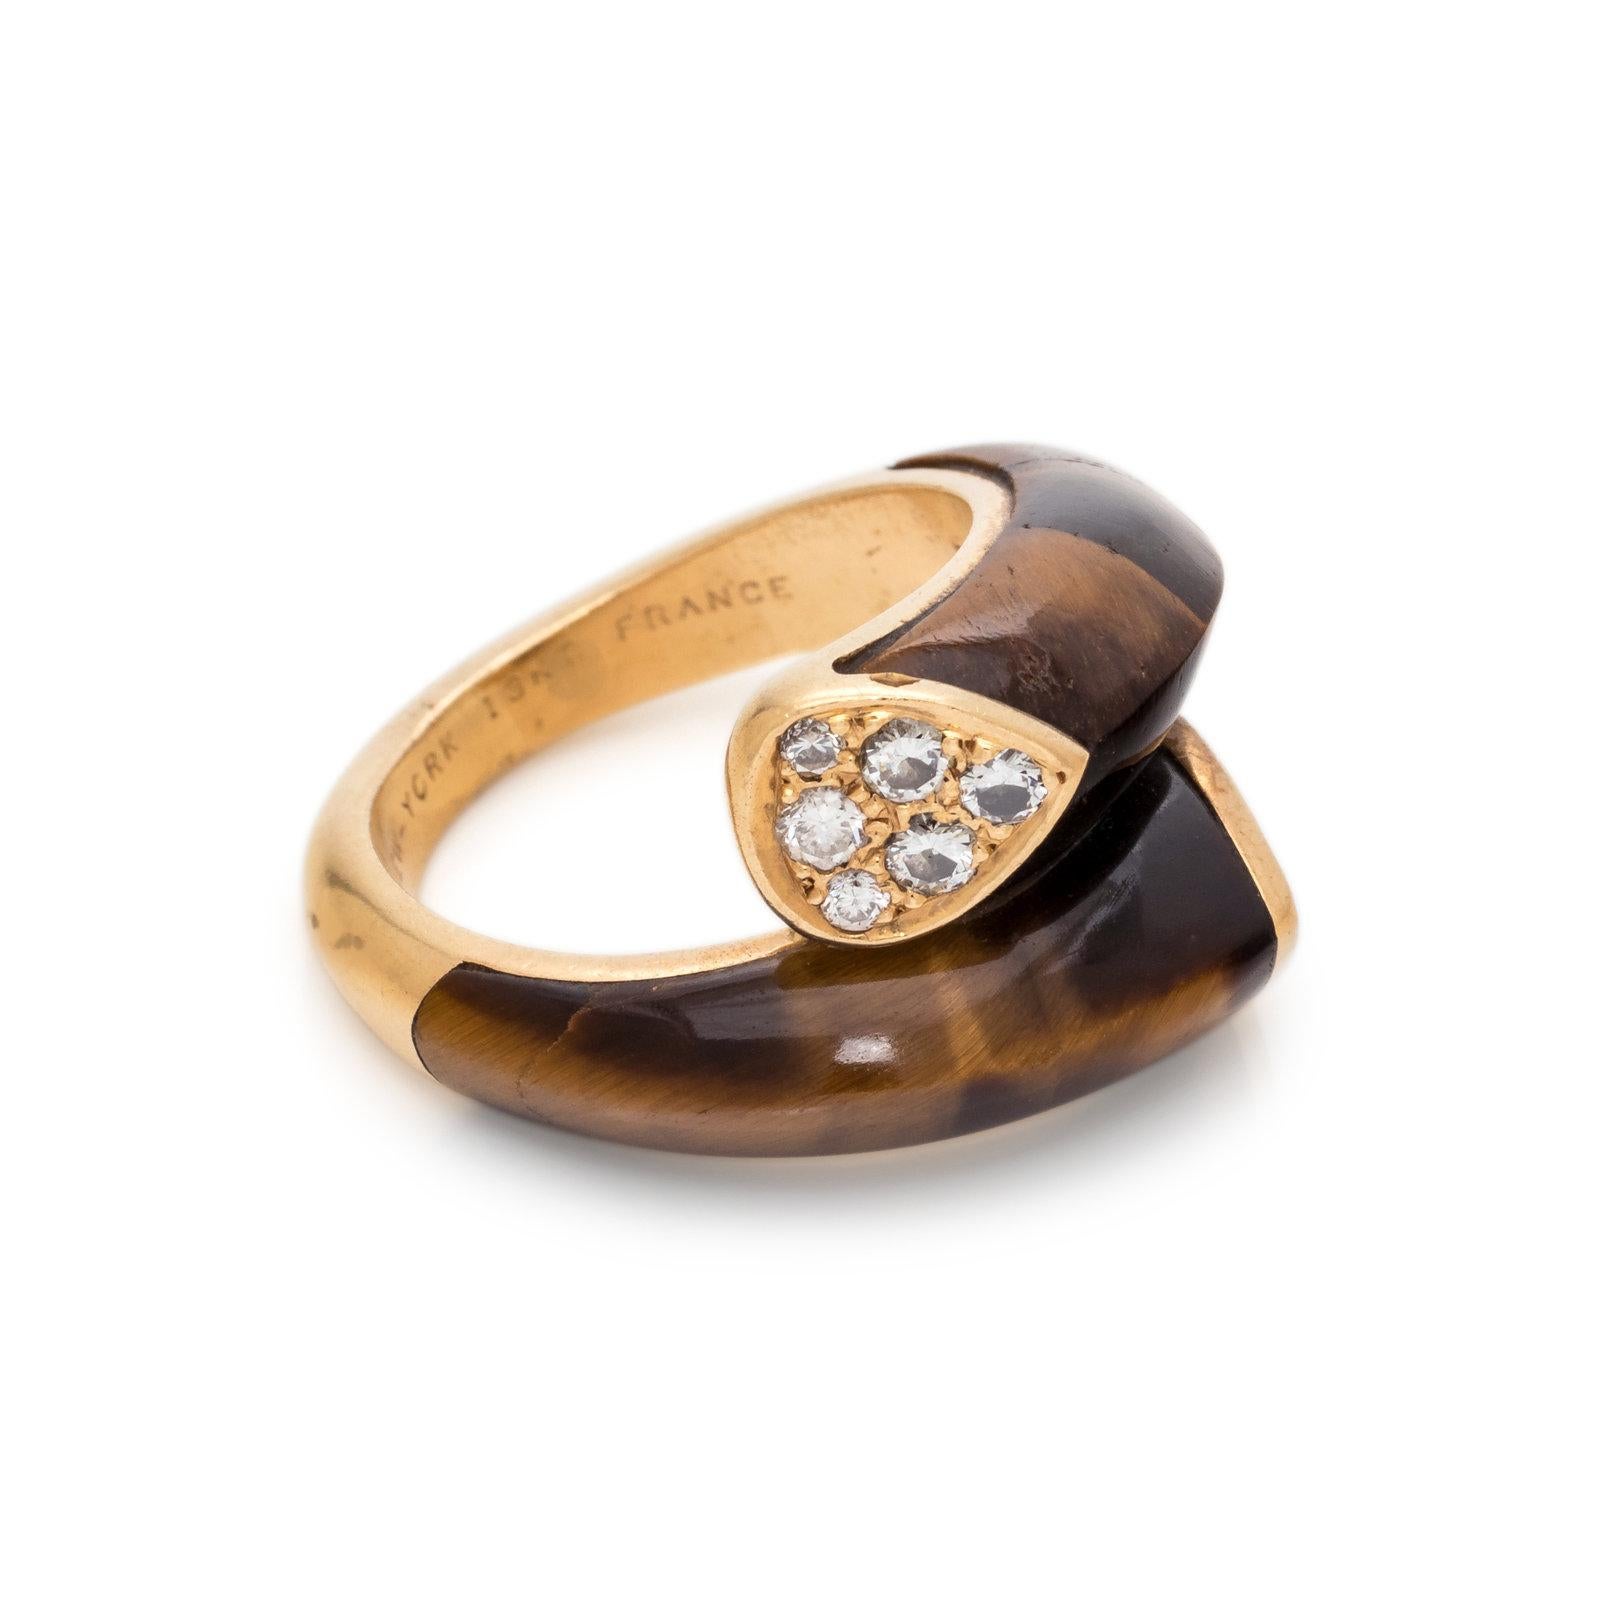 This 18K yellow gold and diamond ring features approximately 0.25 carats of diamonds and tiger’s eye plaques in a bypass design set in yellow gold. Size 4.75. Stamp: V. C. A. NEW - YORK 18KT. FRANCE 5V501.23
Interior is engraved: ALL MY LOVE ARNOLD